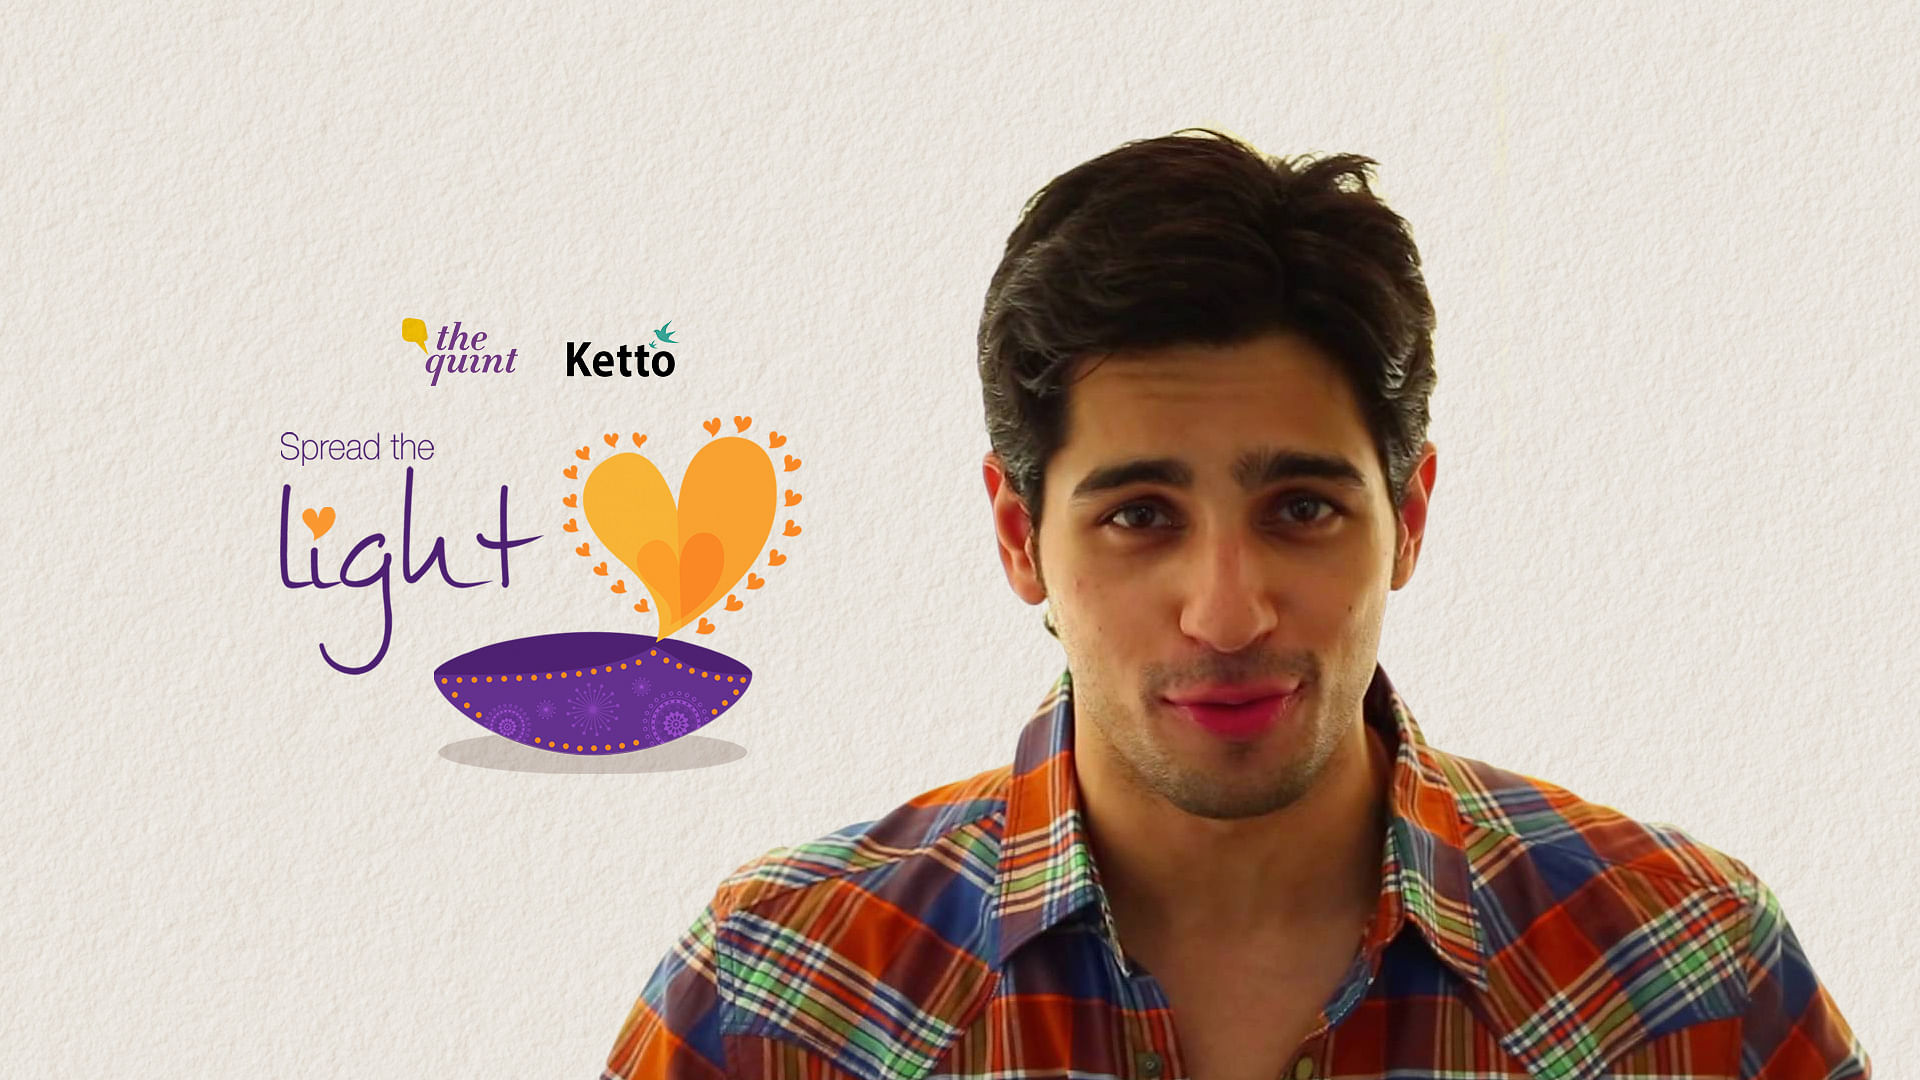 Sidharth Malhotra says this Diwali, do good be good (Photo: Altered by The Quint)